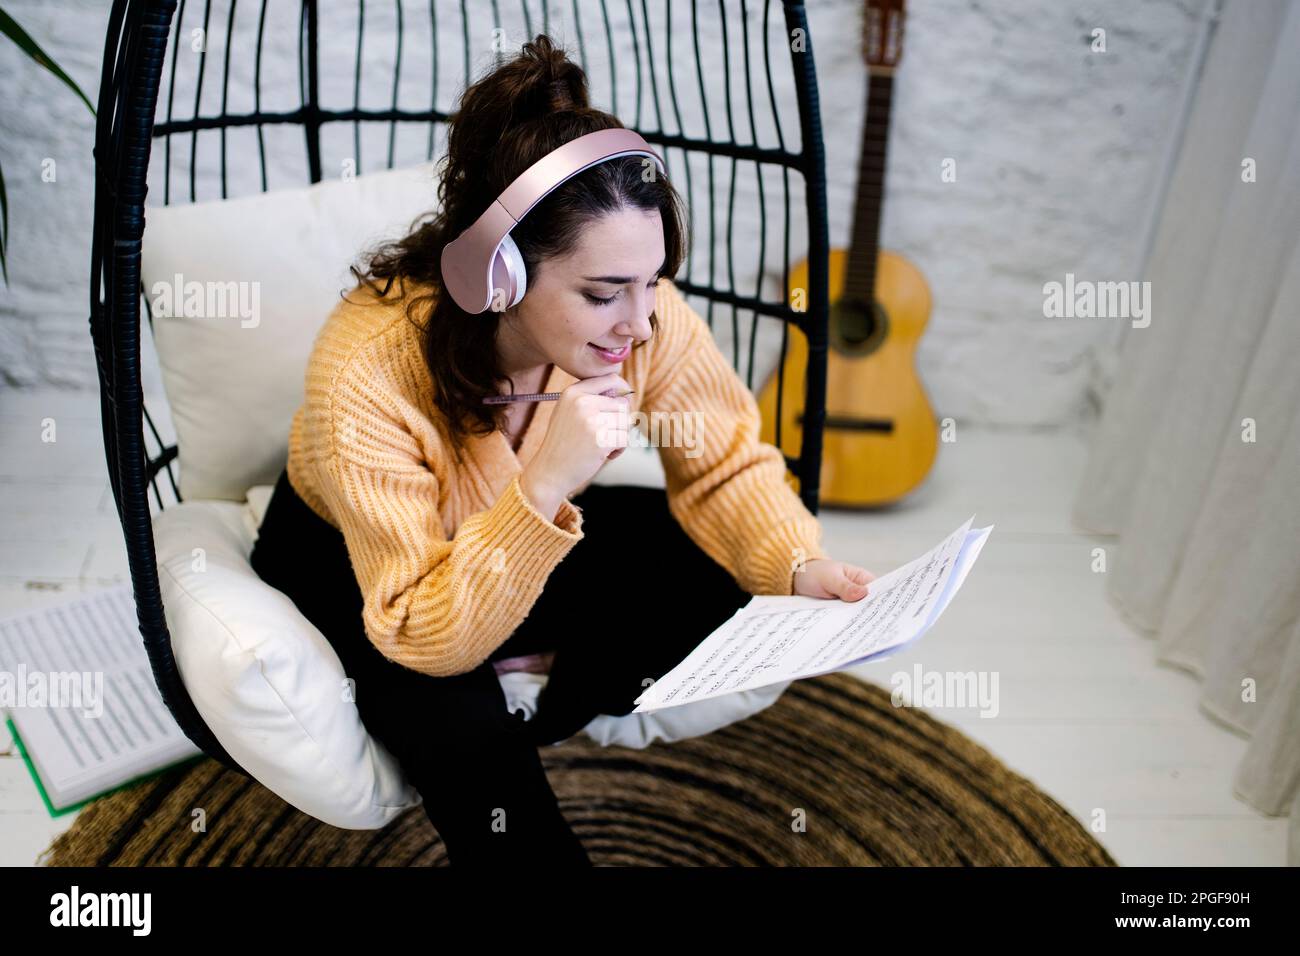 Young Woman with headphones and a guitar composing music at home Stock Photo